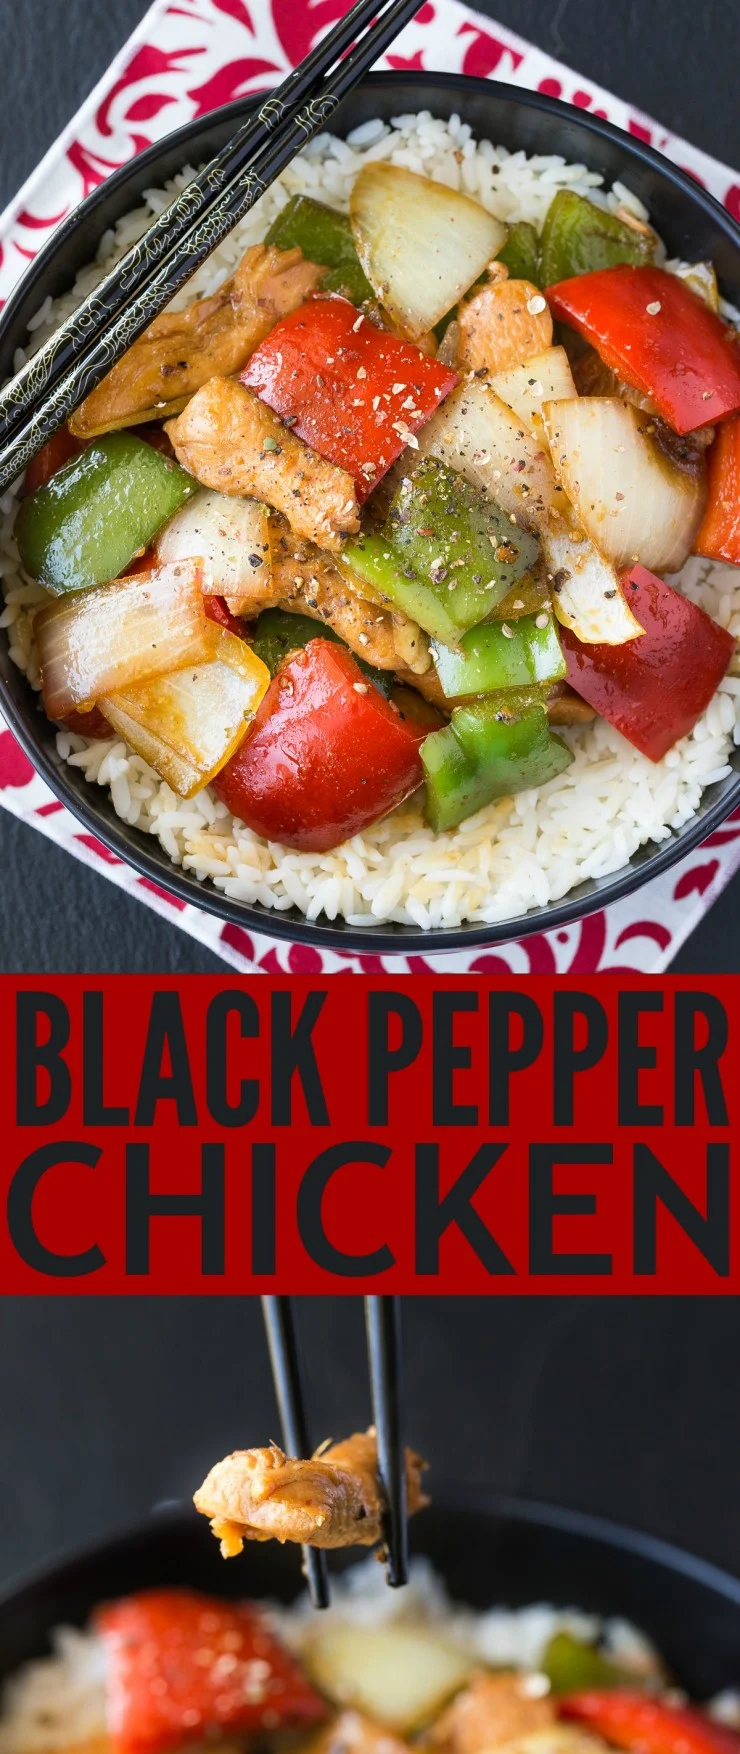 A Chinese food restaurant classic, this Black Pepper Chicken recipe is super easy to make at home. It's a flavourful asian-inspired dish the whole family can enjoy!